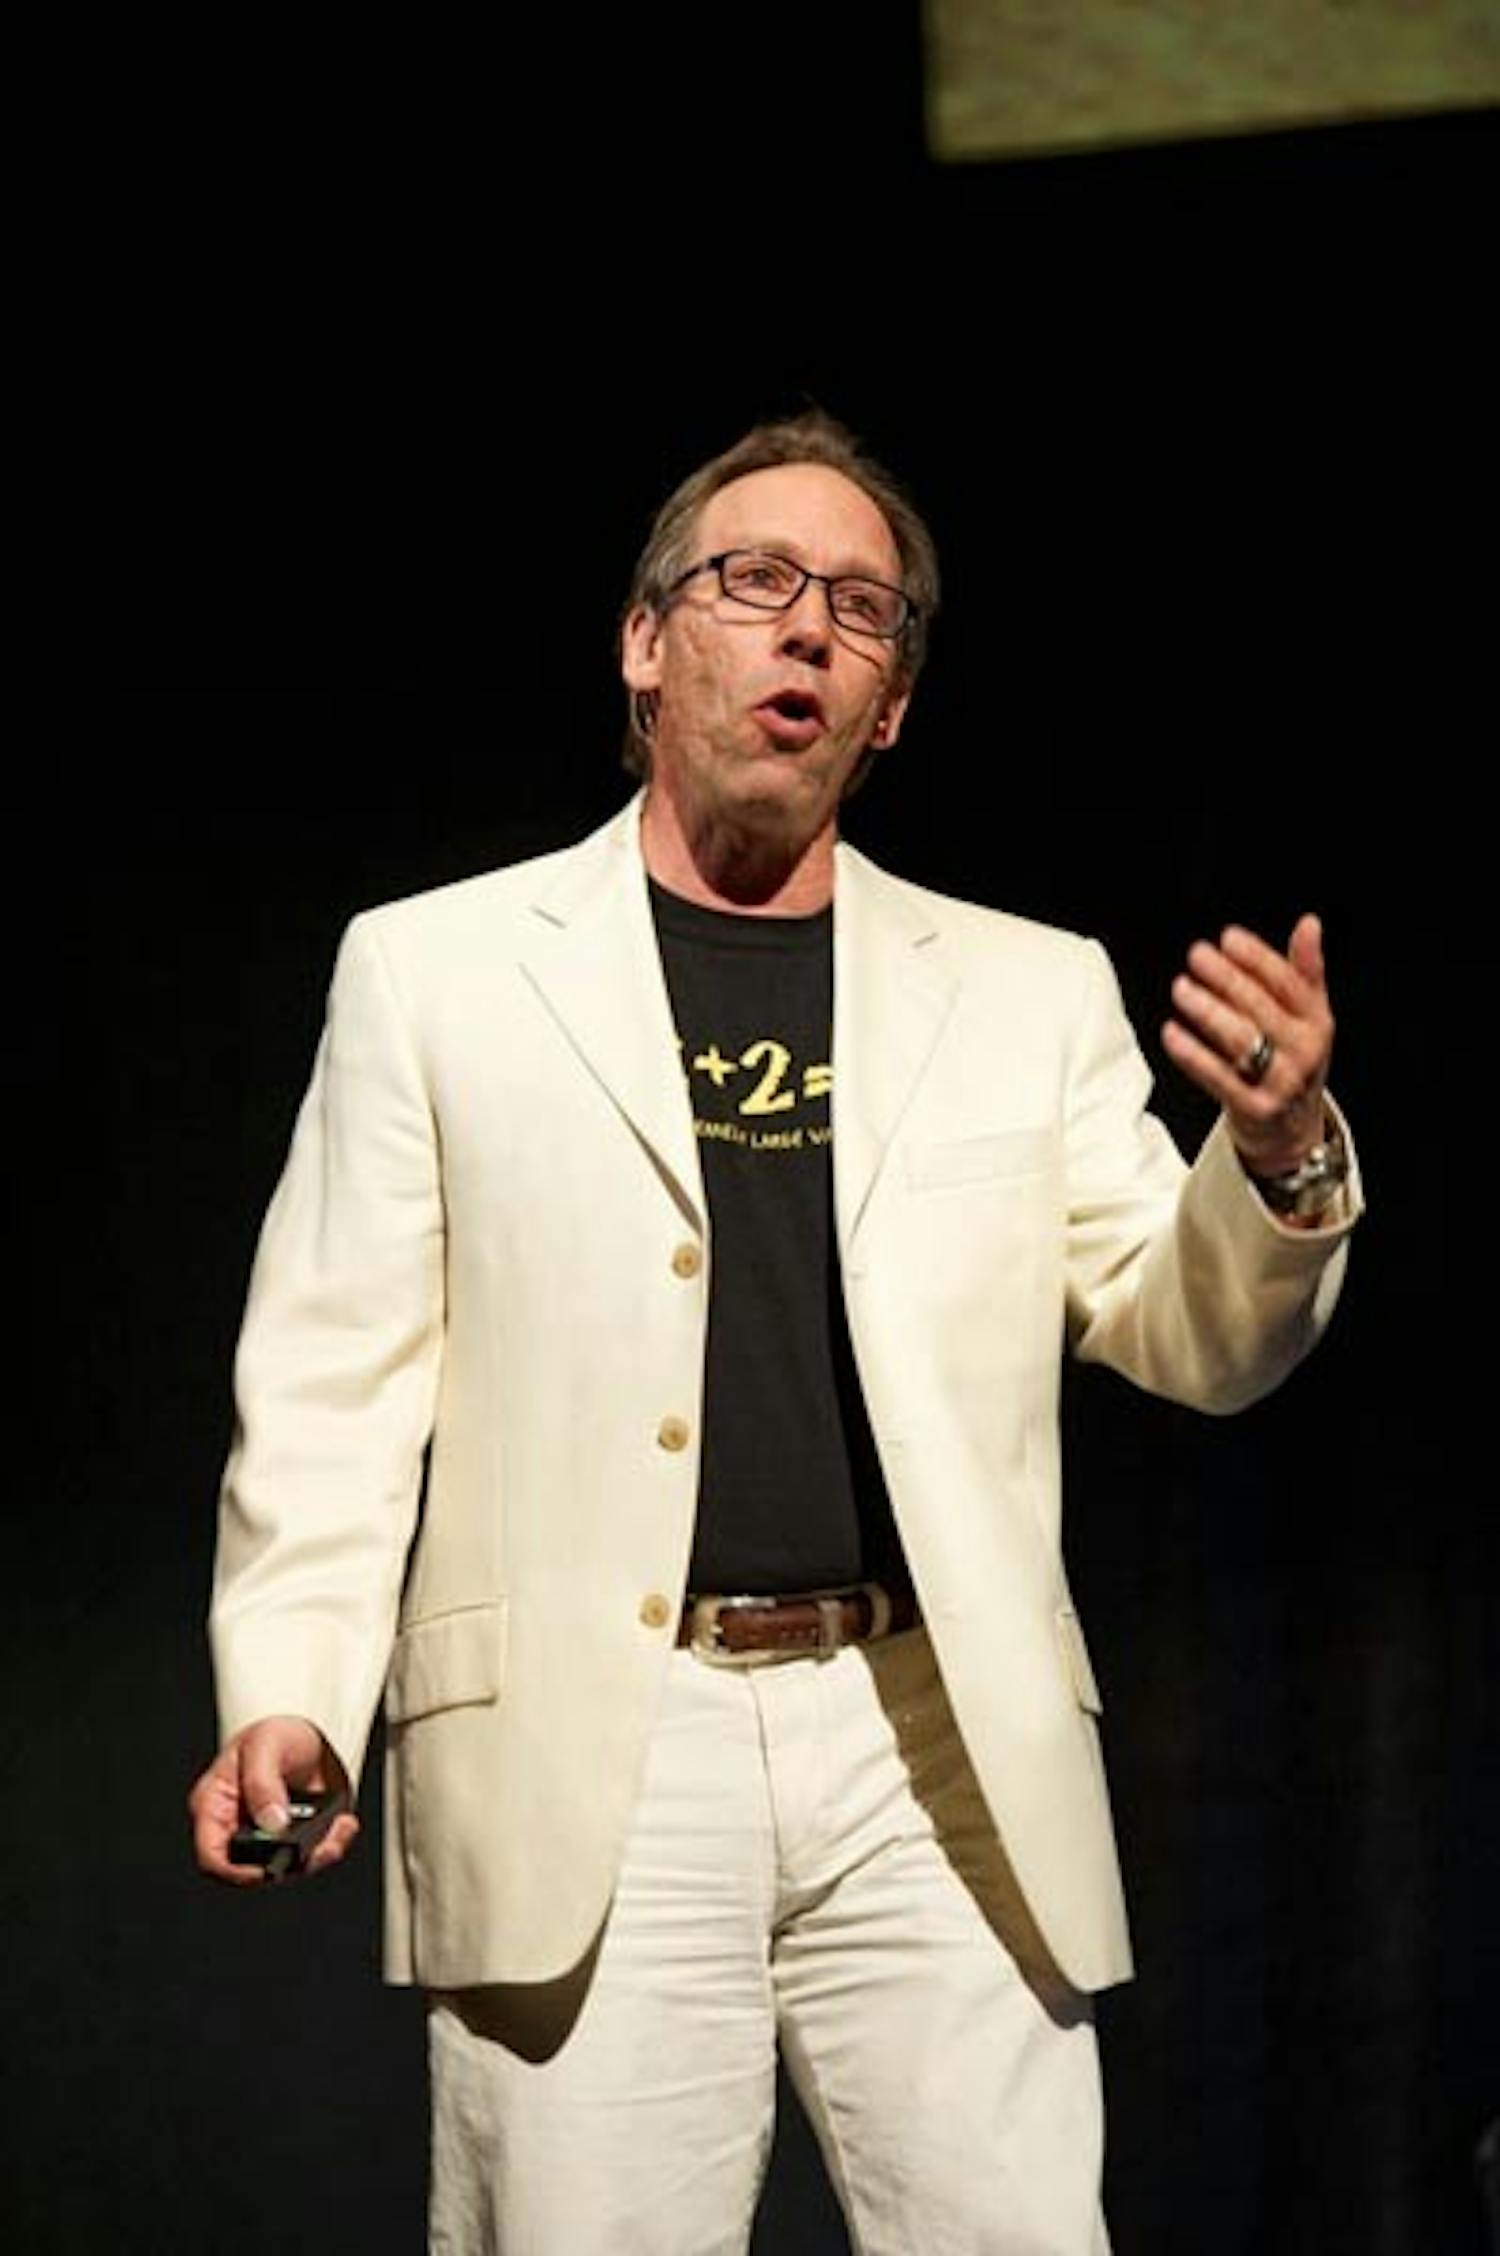 THE GREAT DEBATE: Lawrence Krauss, a physicist and director of ASU's Origins Project, discusses science's contribution to values of right and wrong during The Great Debate, held Saturday night in Gammage Auditorium. A panel of philosophers and ethicists gathered to debate the role of science in ethical judgments. (Photo by Michael Arellano)